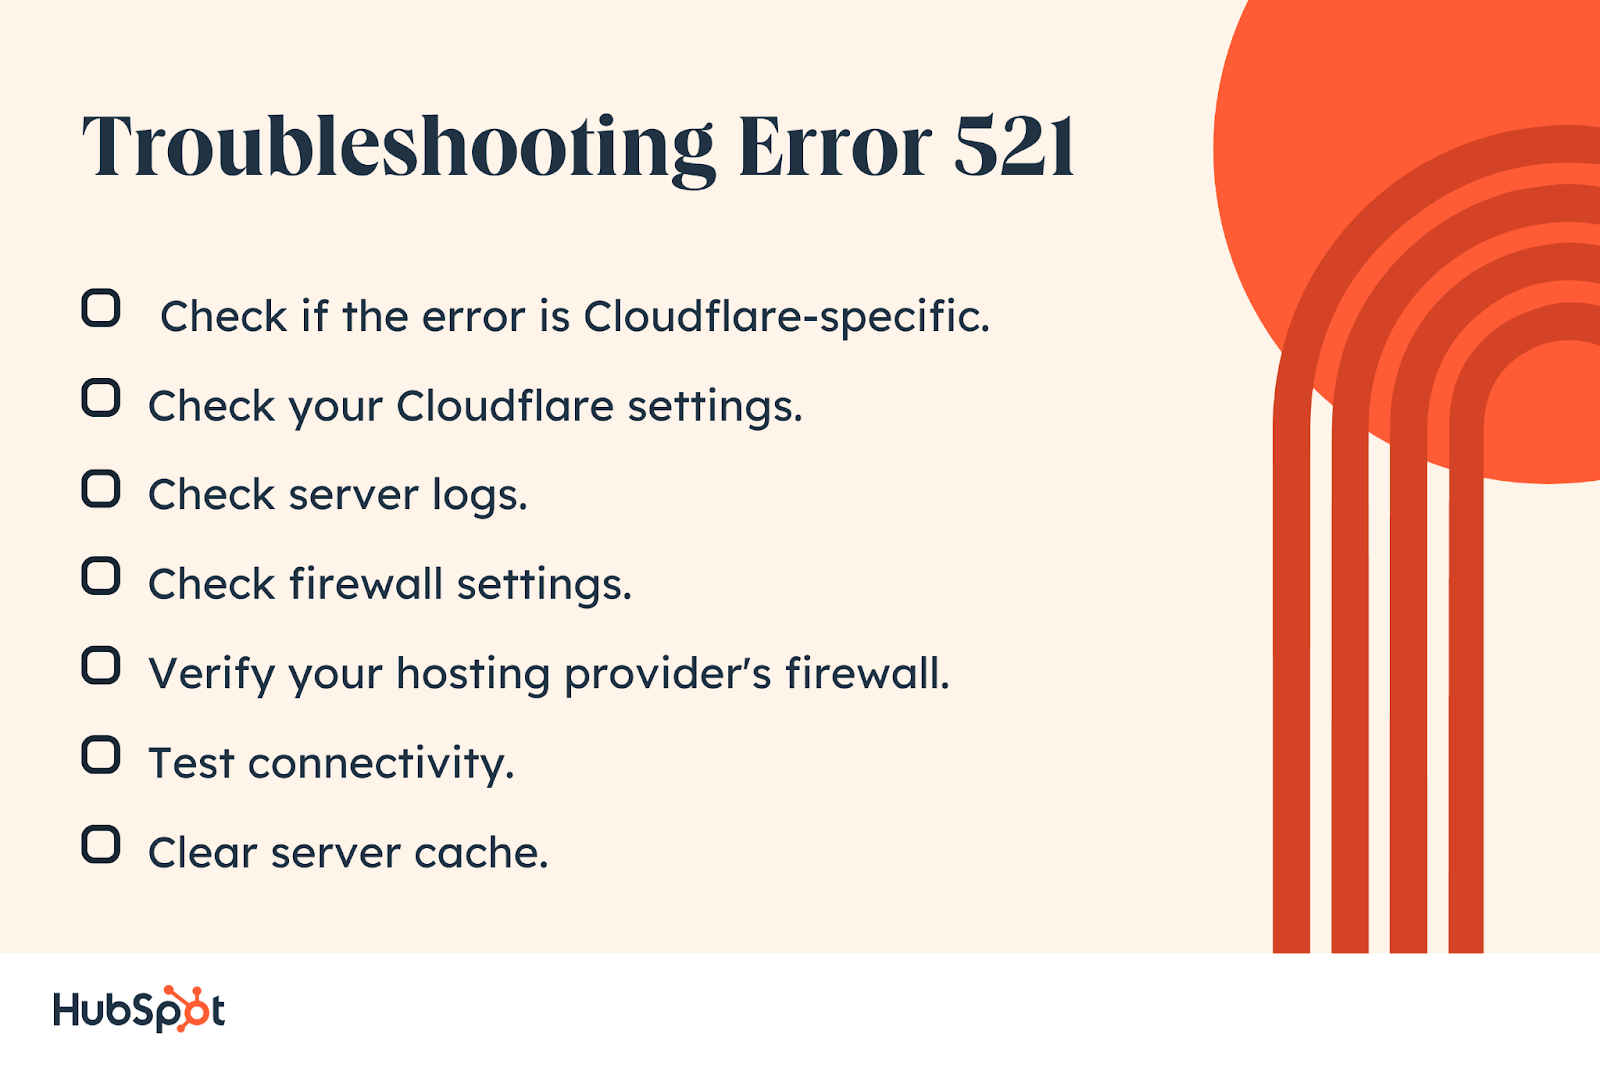 Troubleshoot Error 521. Check your Cloudflare settings. Check server logs. Check firewall settings. Check if the error is Cloudflare-specific. Verify your hosting provider's firewall. Test connectivity. Clear server cache.